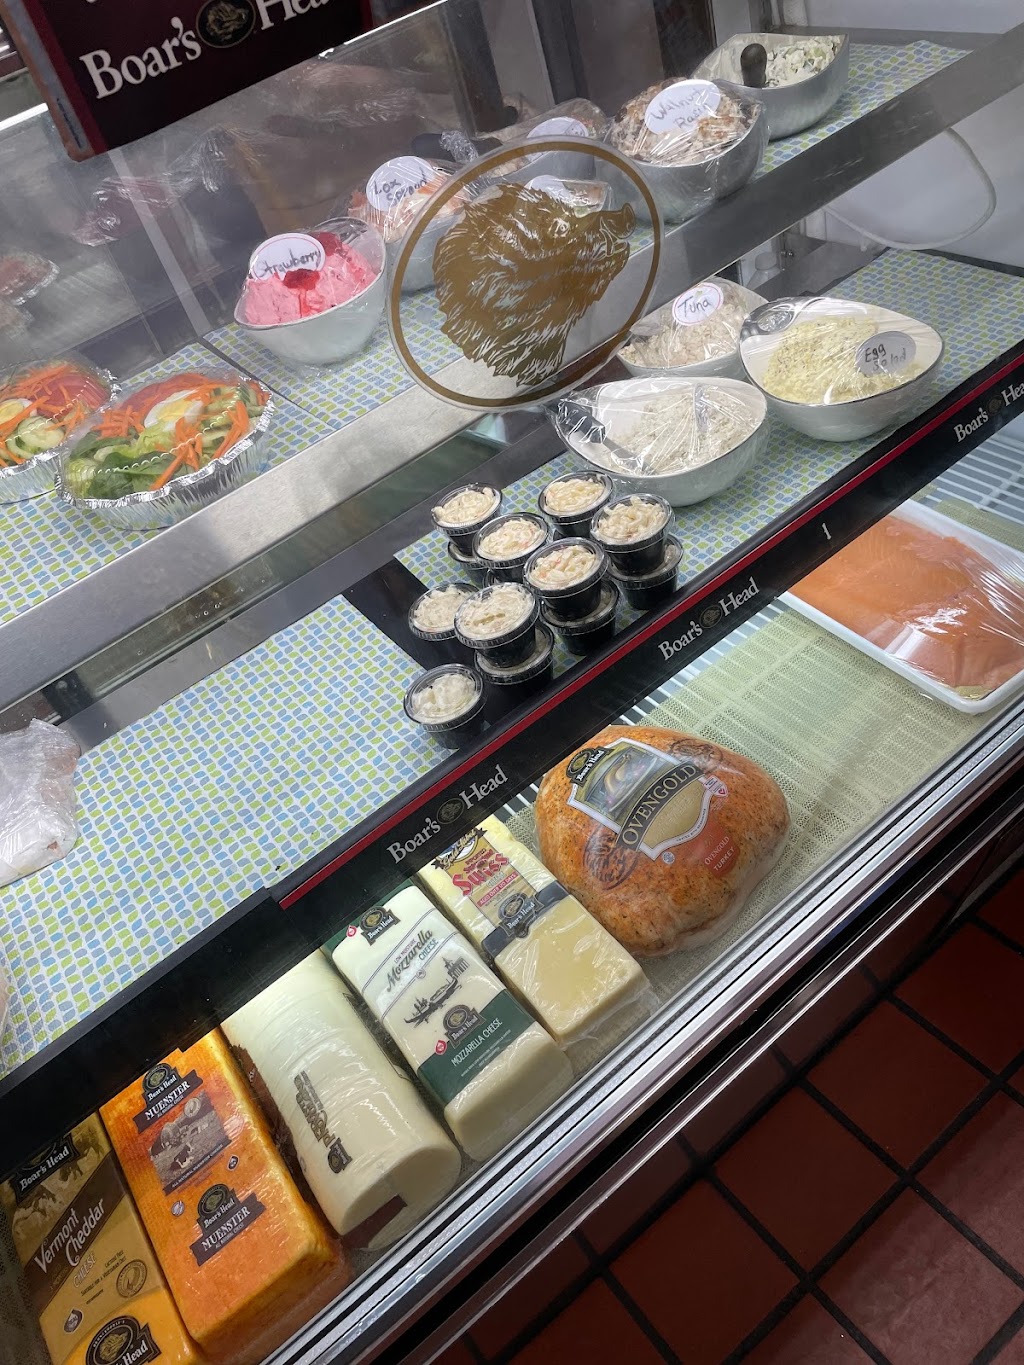 Family Bagels | 308 Jericho Turnpike, Floral Park, NY 11001 | Phone: (516) 358-4015